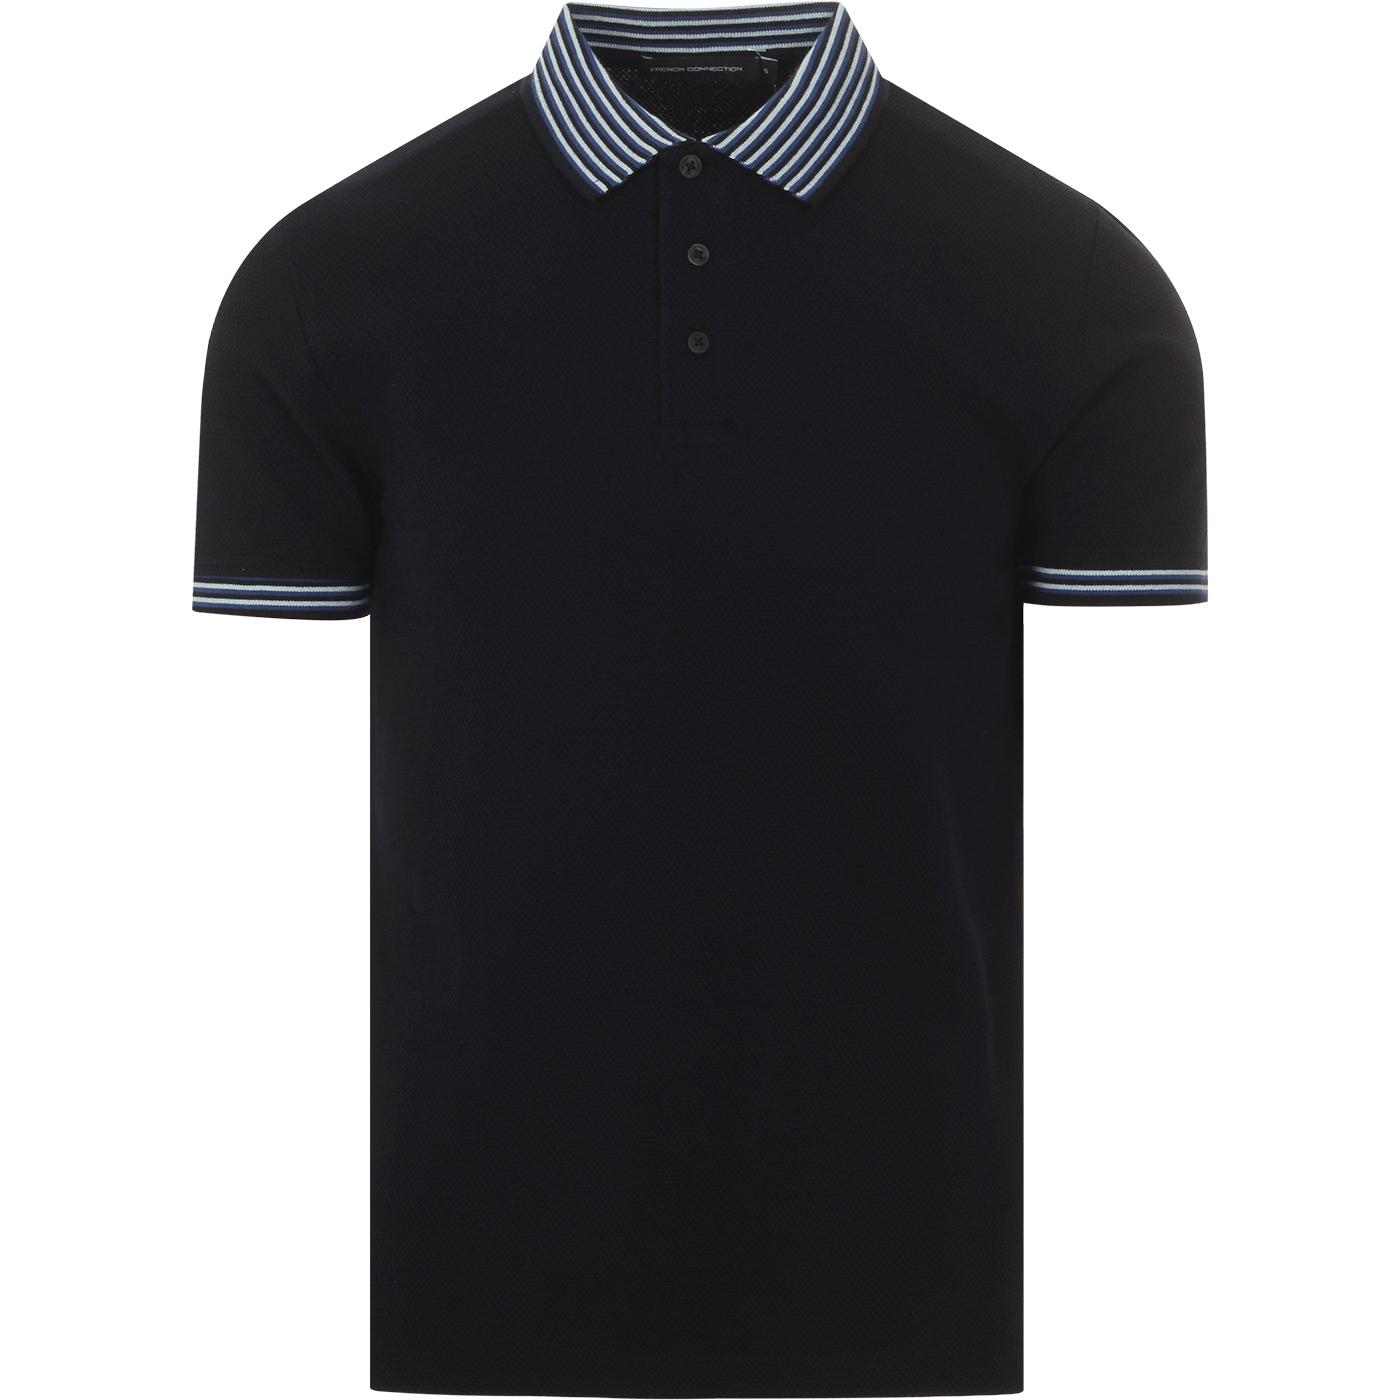 FRENCH CONNECTION Retro Popcorn Jersey Polo Top